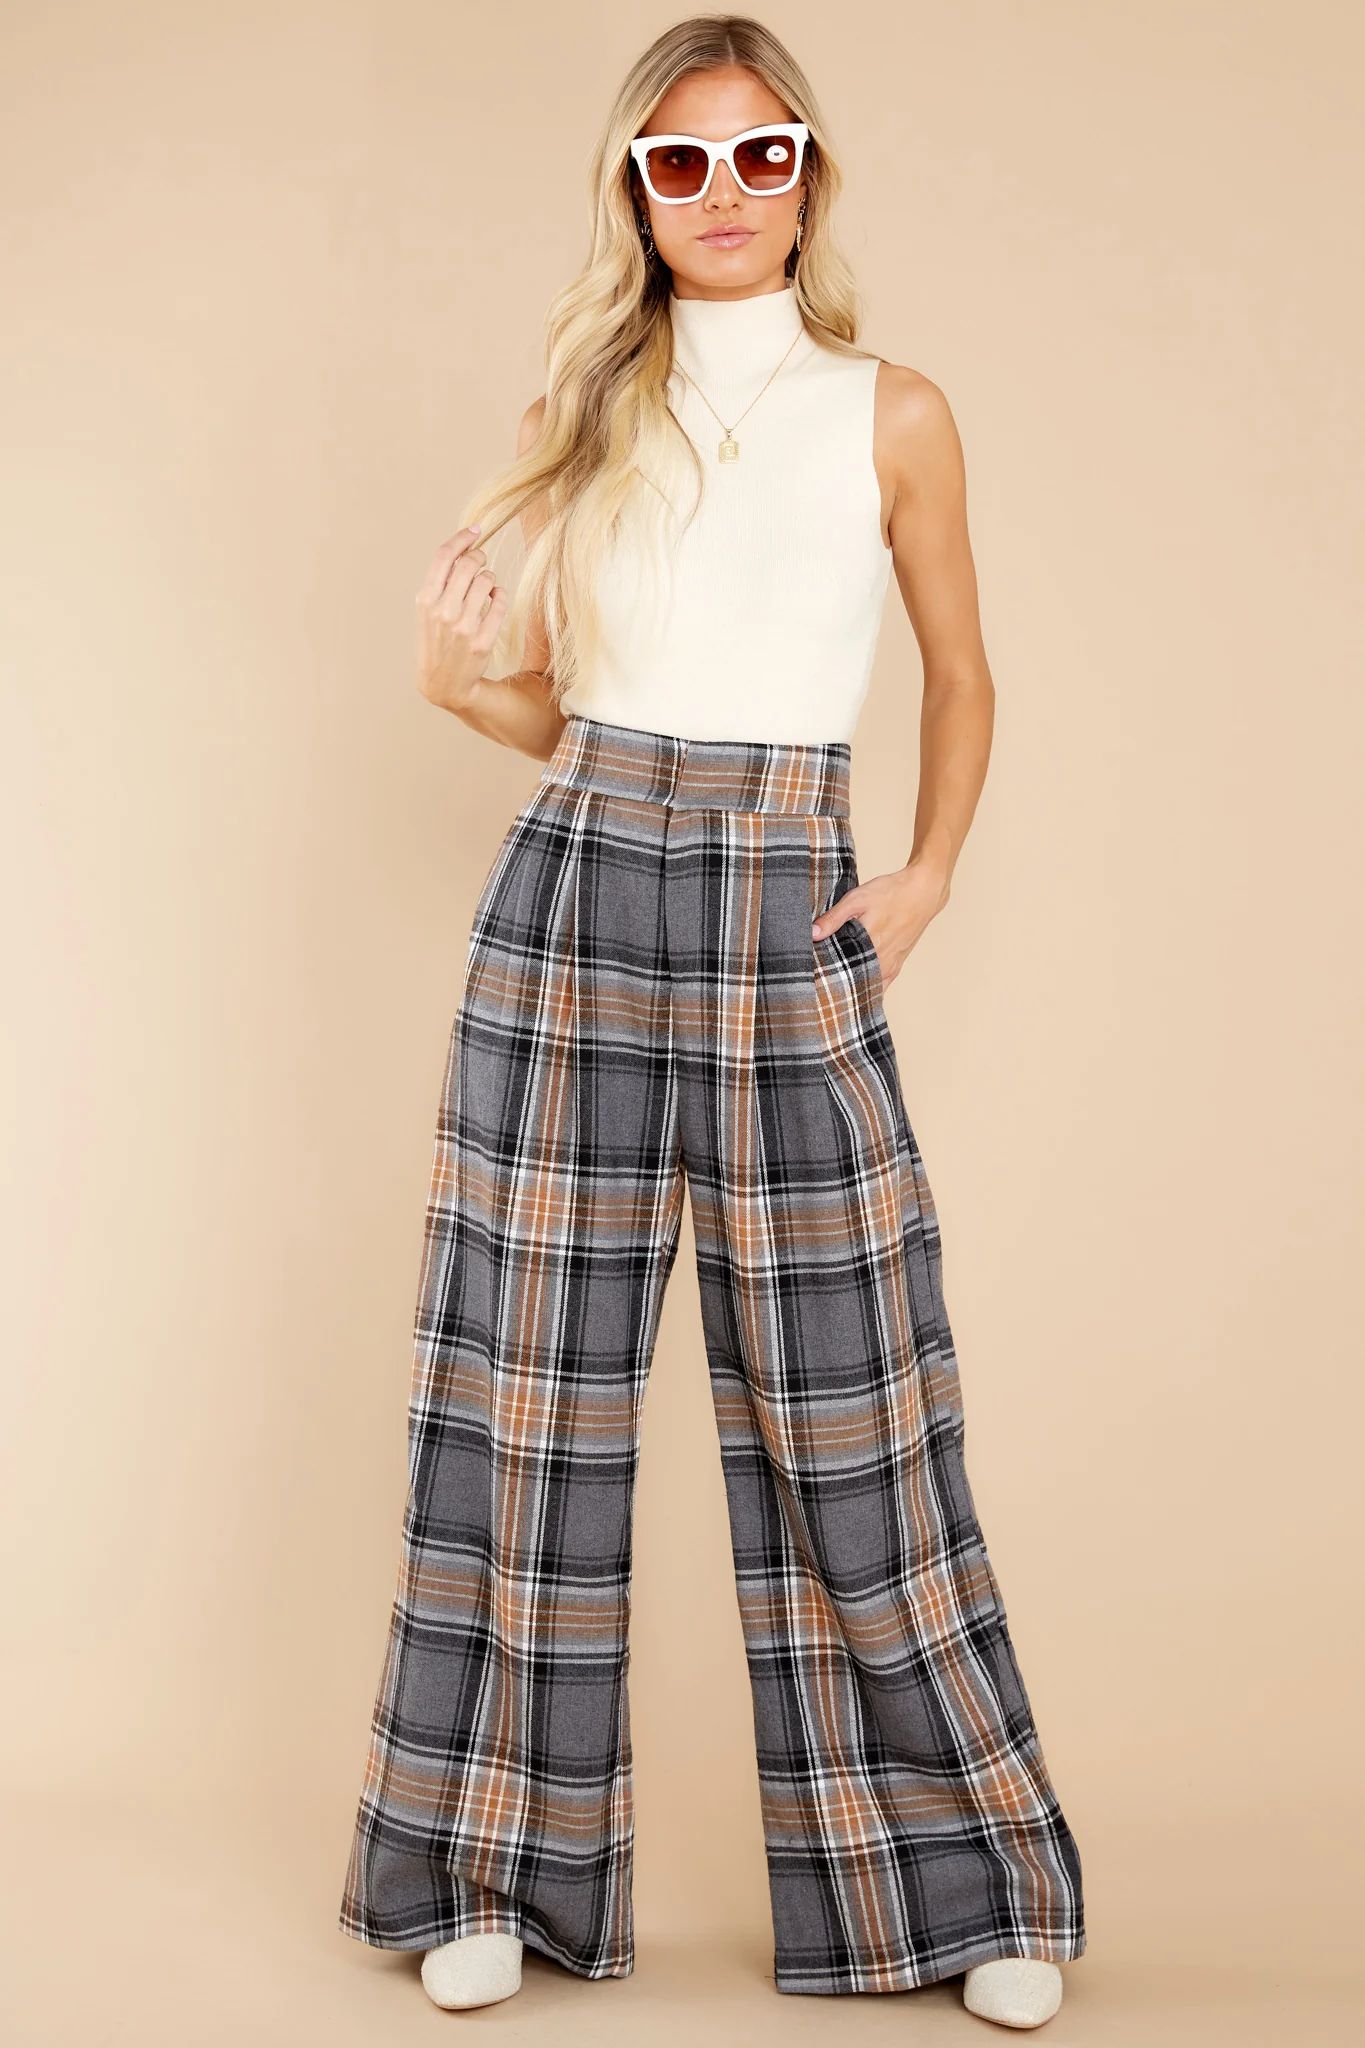 Official Glam Grey And Caramel Plaid Pants | Red Dress 